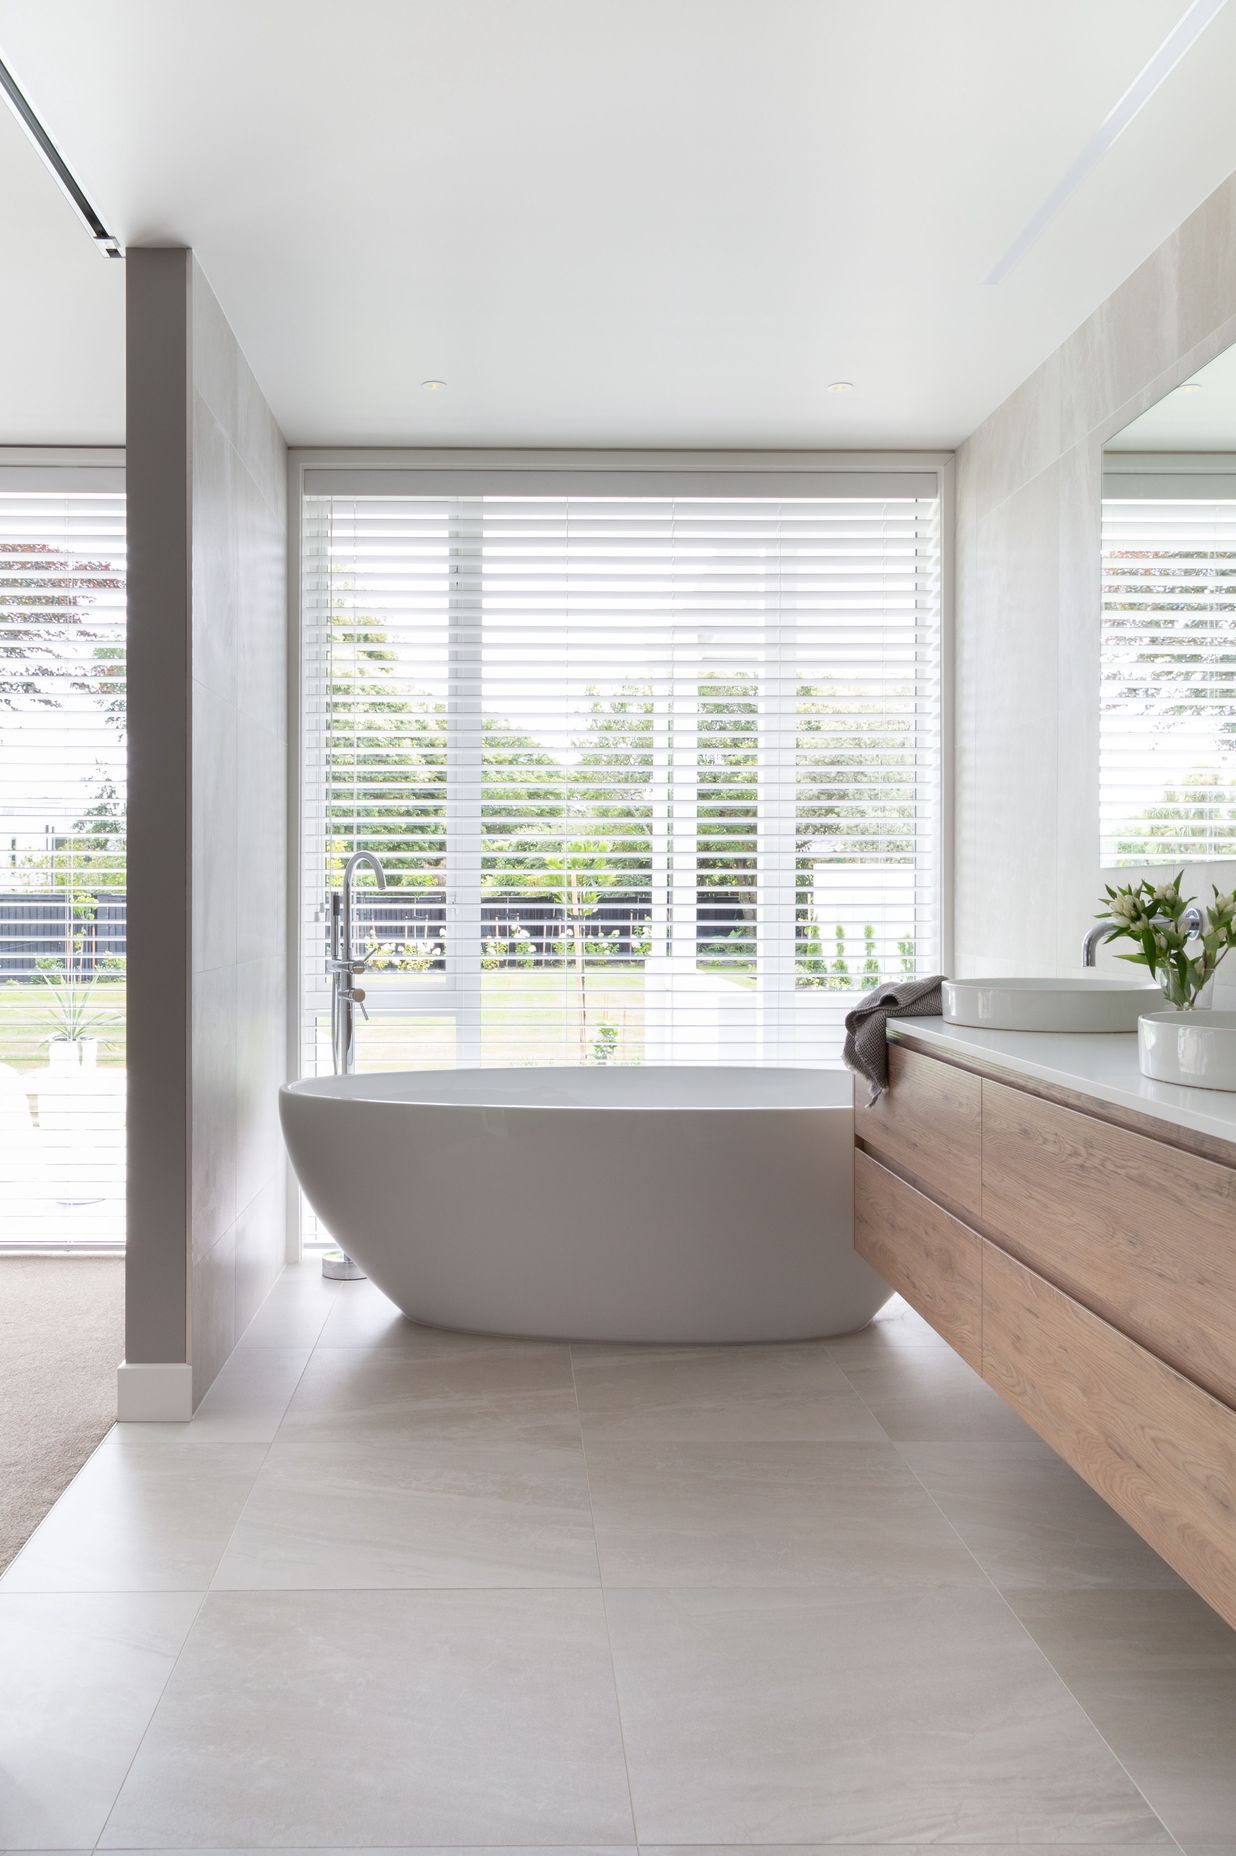 The master en suite's bath has an unobstructed view out to the backyard, while operable shutters provide privacy.